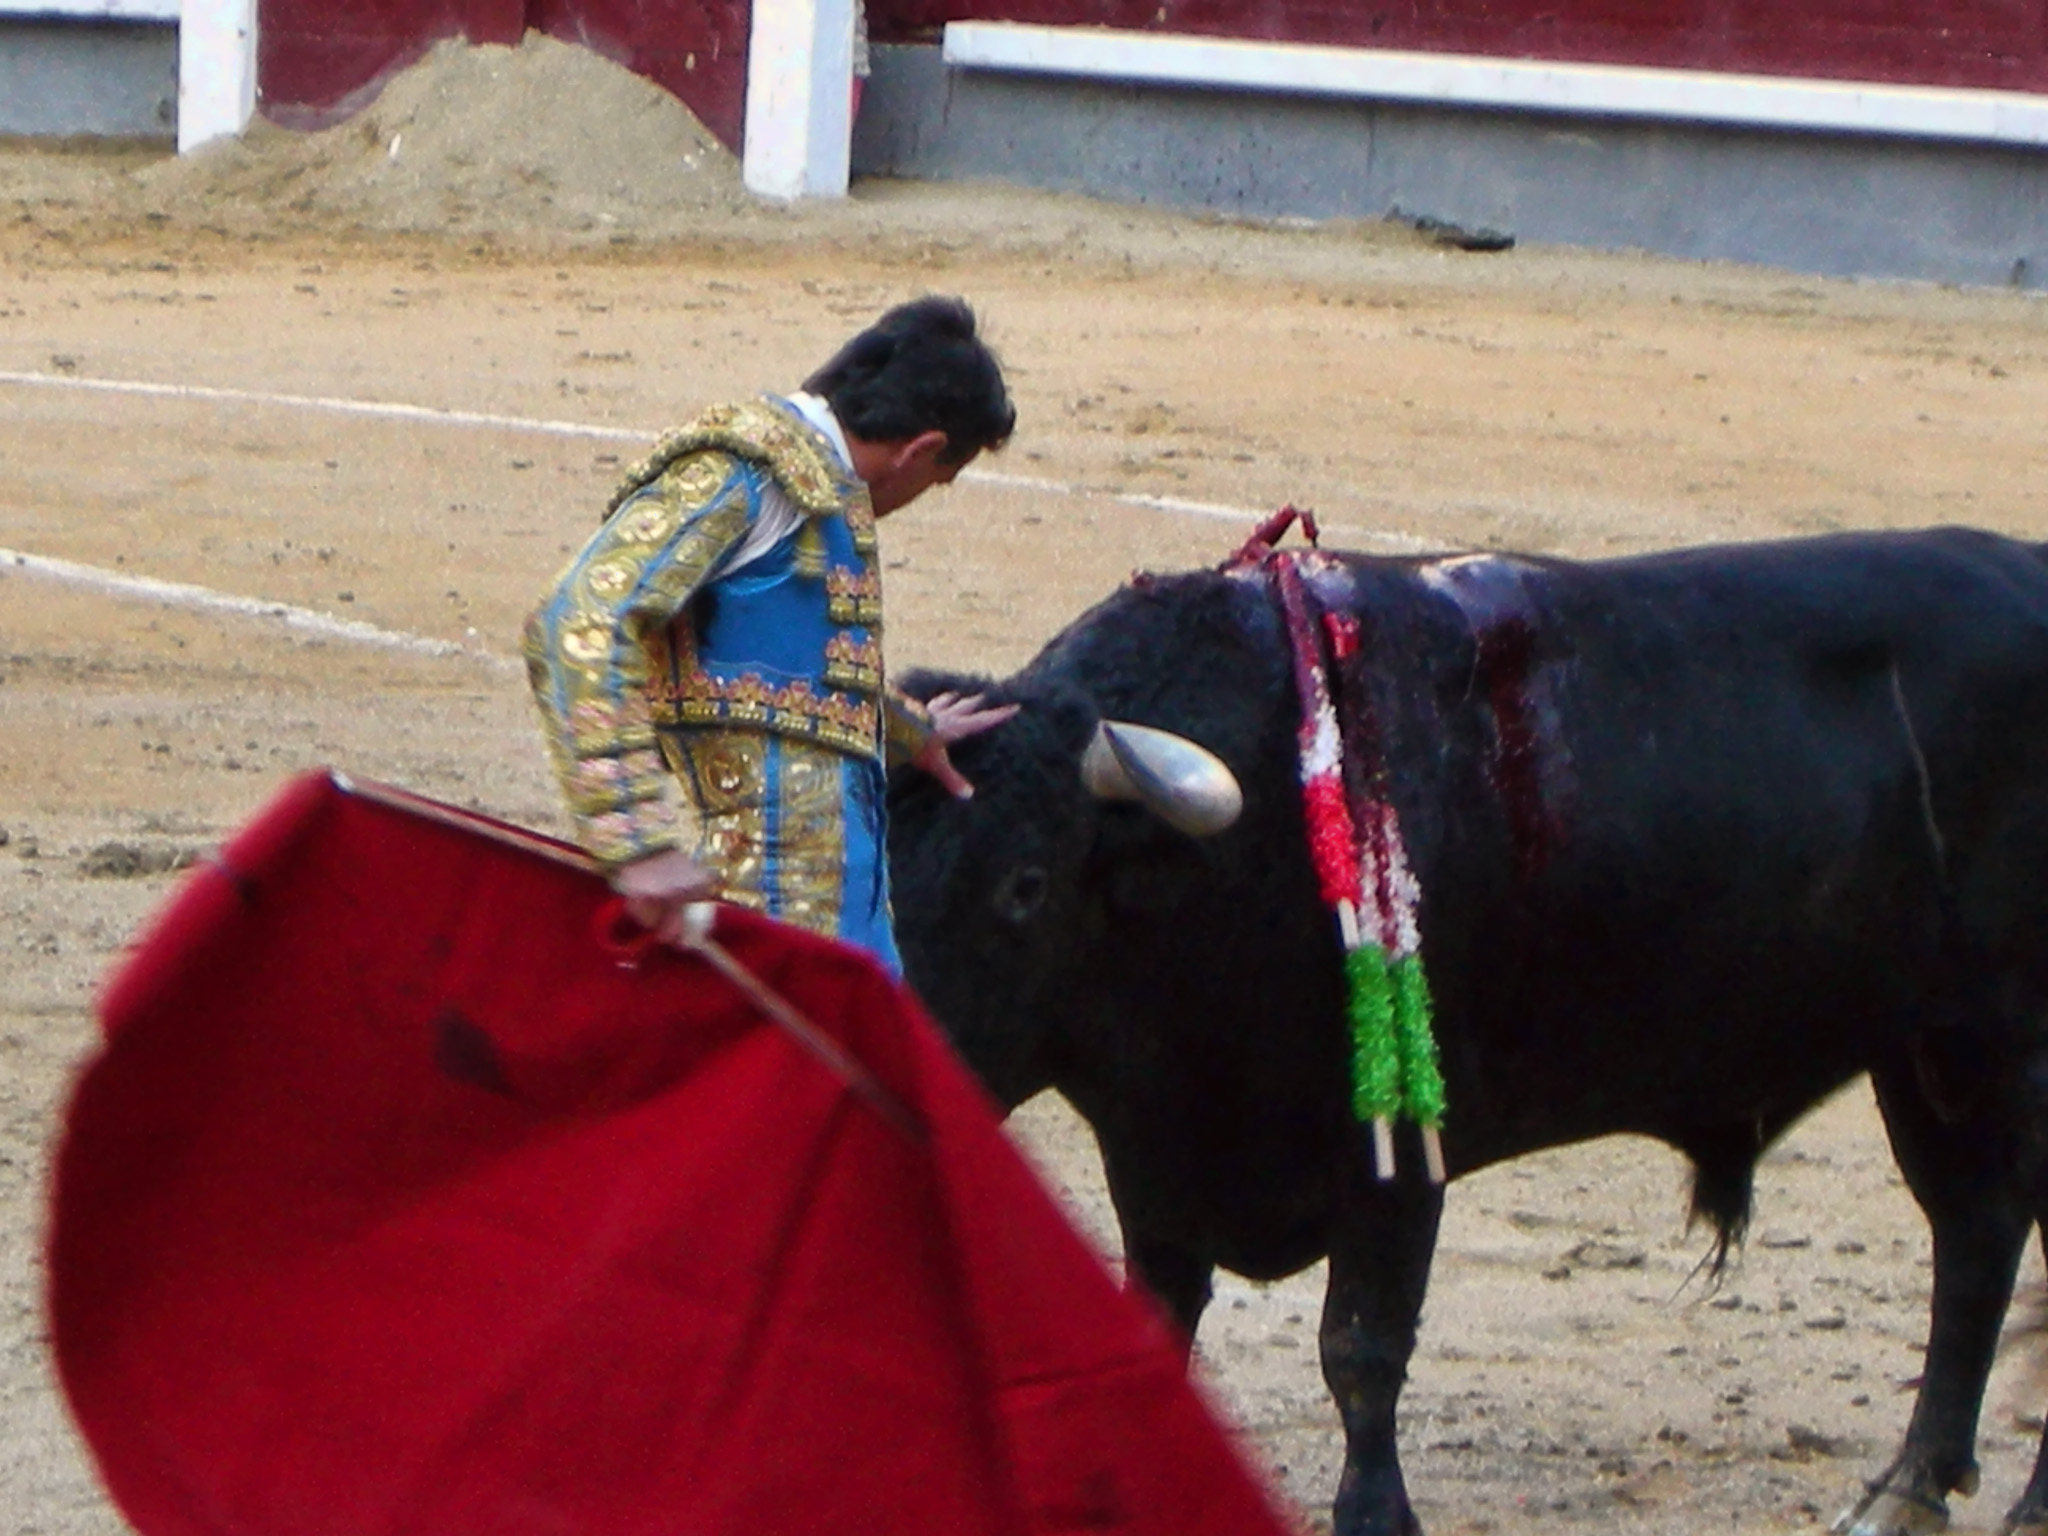 a man standing next to a large bull wearing red garb